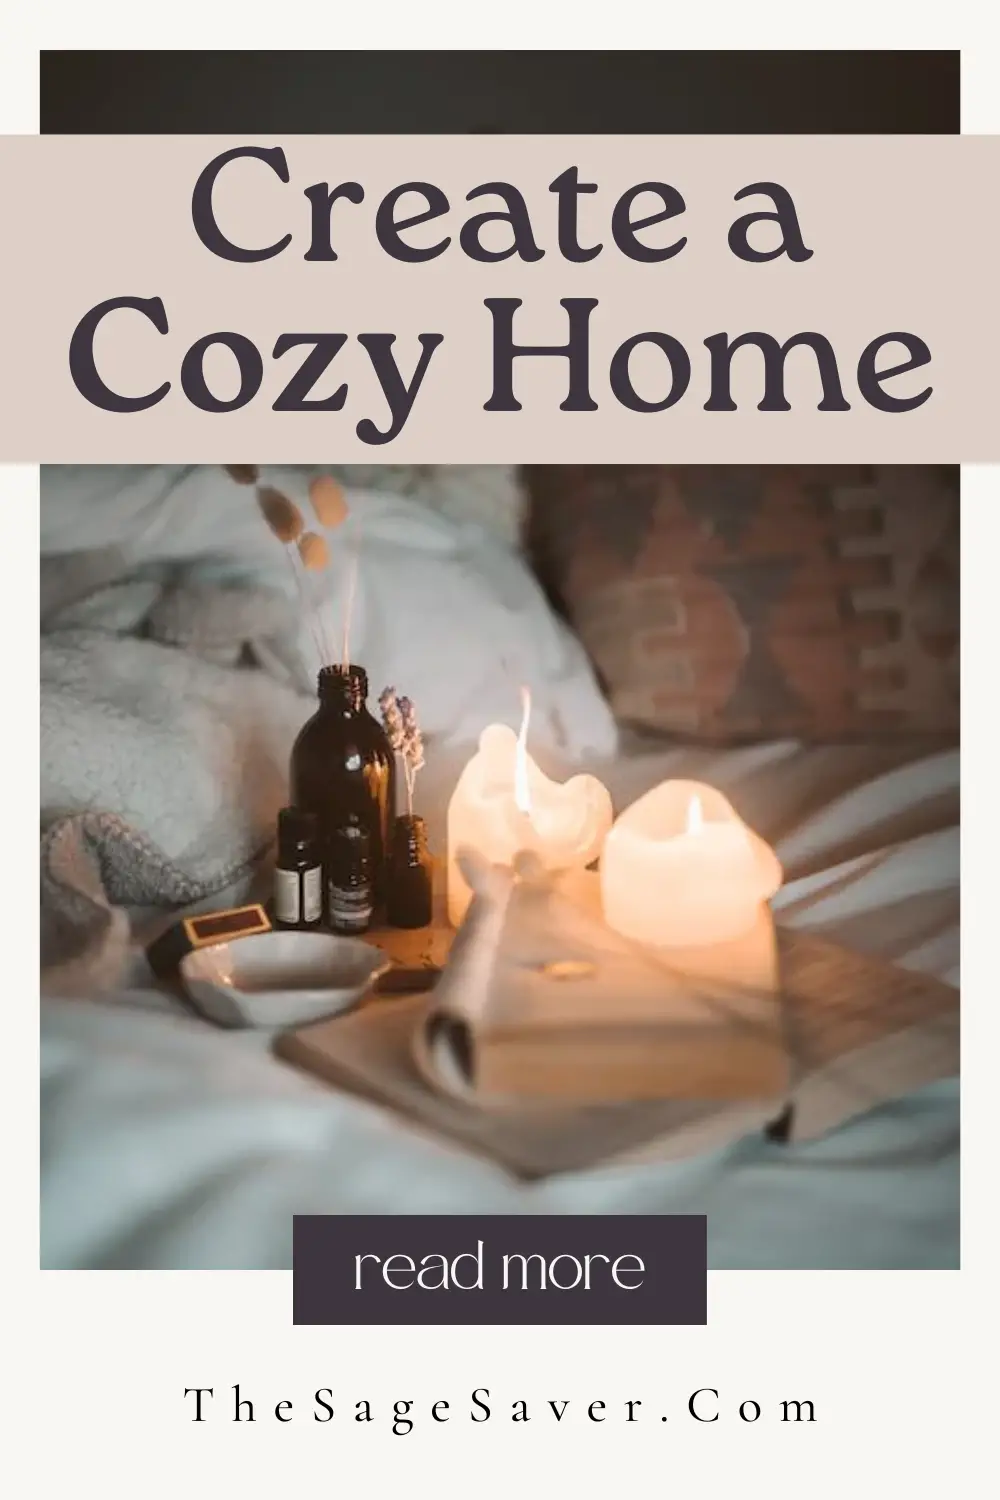 How to Make Your Home More Cozy